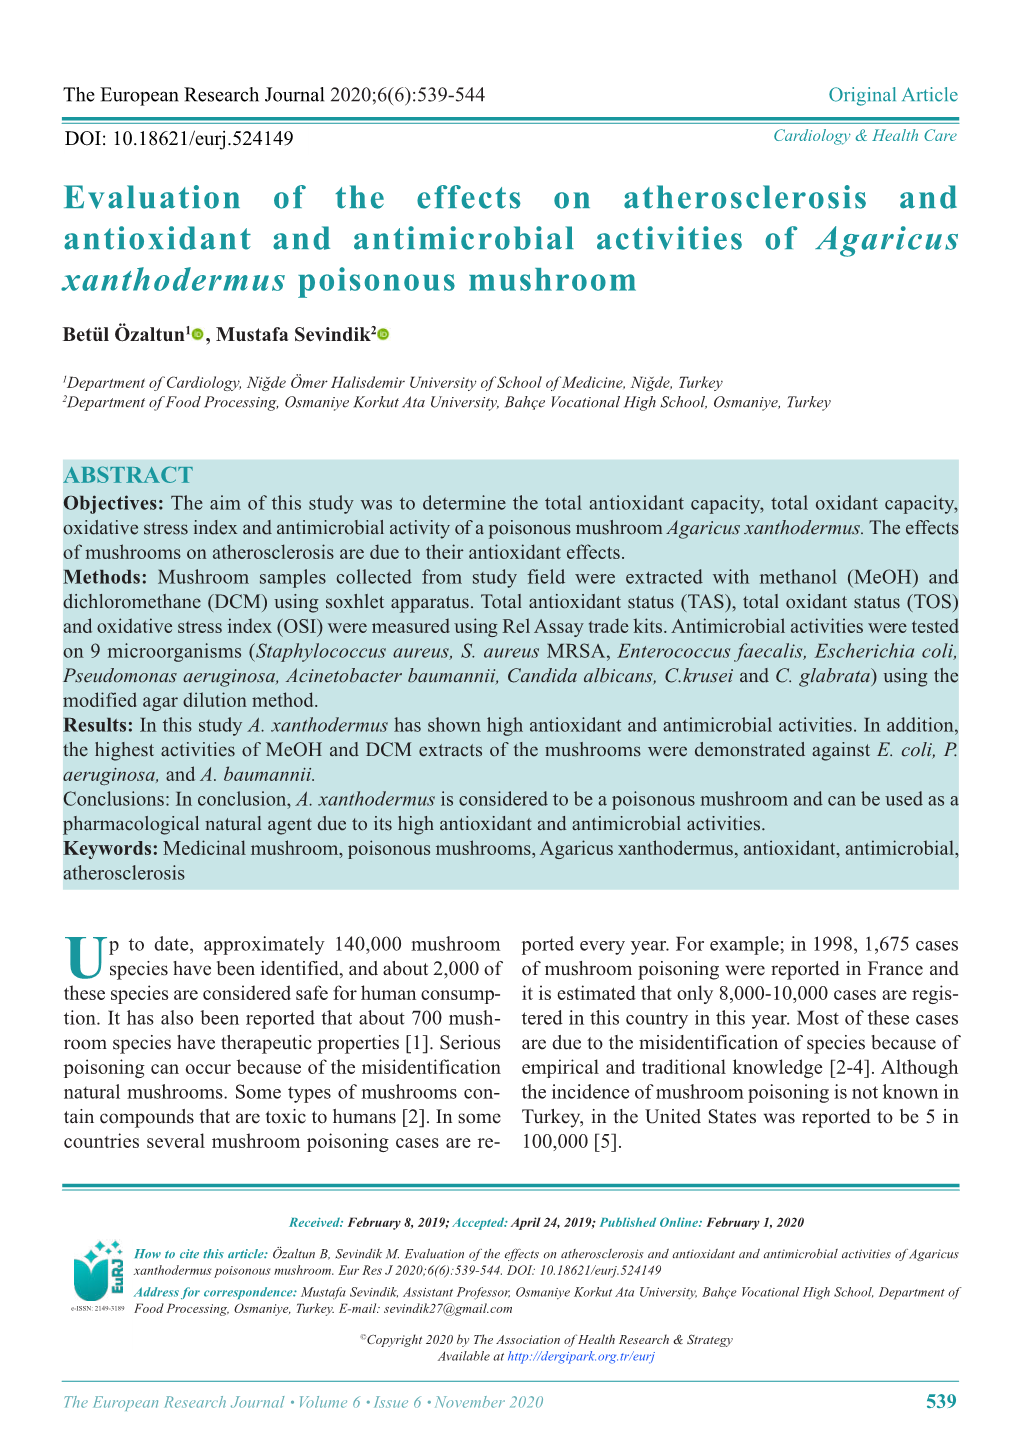 Evaluation of the Effects on Atherosclerosis and Antioxidant and Antimicrobial Activities of Agaricus Xanthodermus Poisonous Mushroom